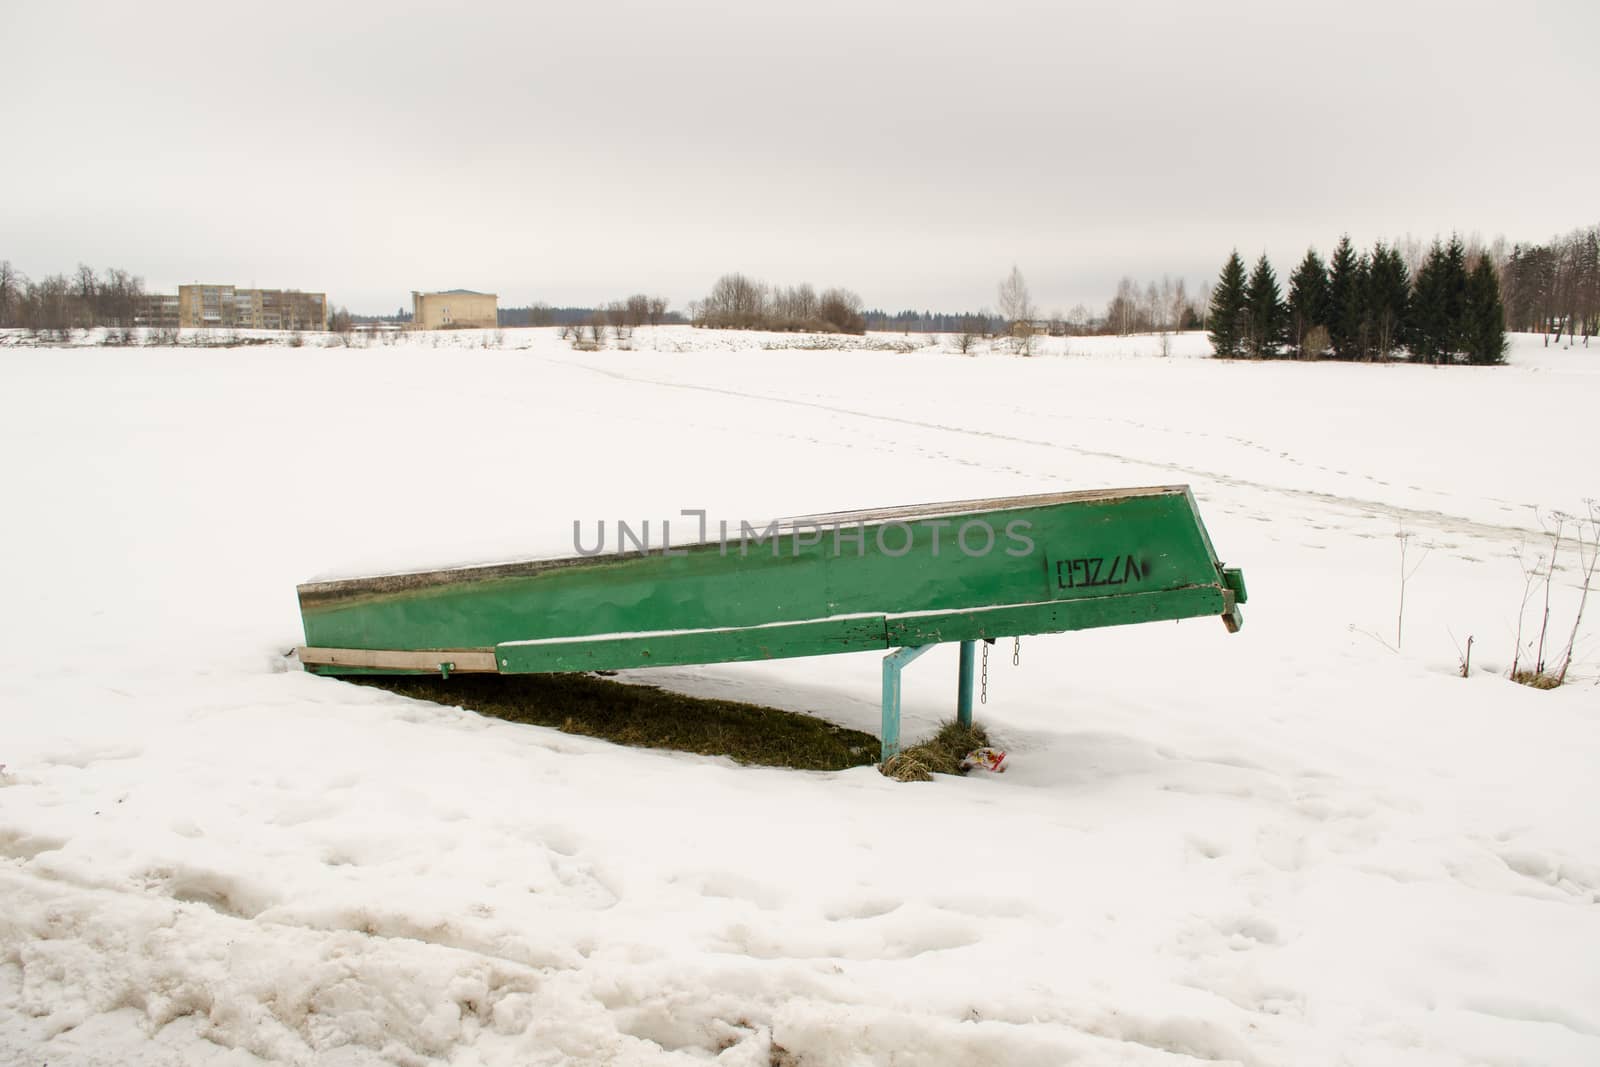 upturned wooden boat covered with snow rest on frozen lake shore bank waiting for warm season in winter.